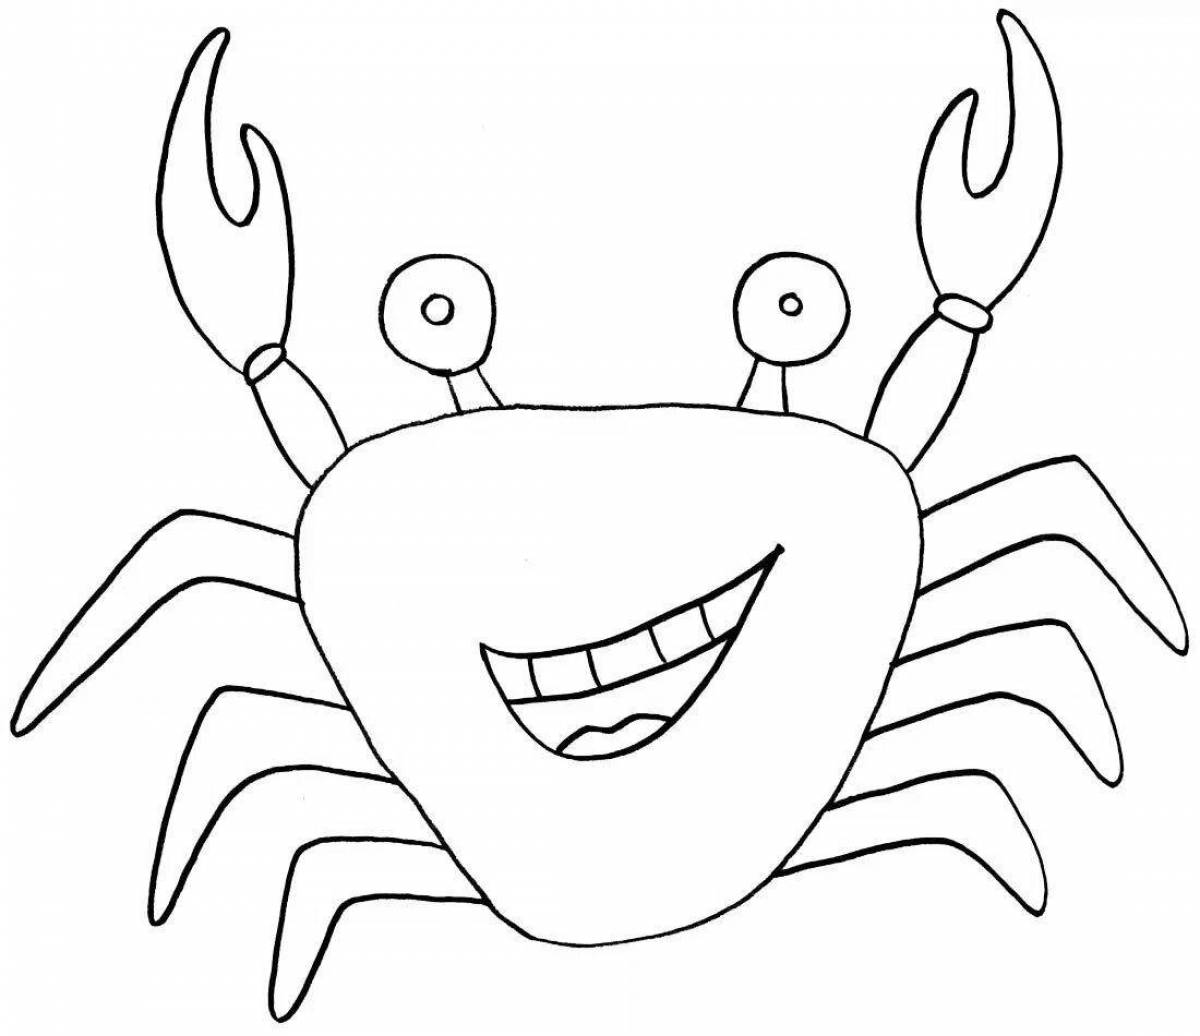 Crab bright coloring for kids